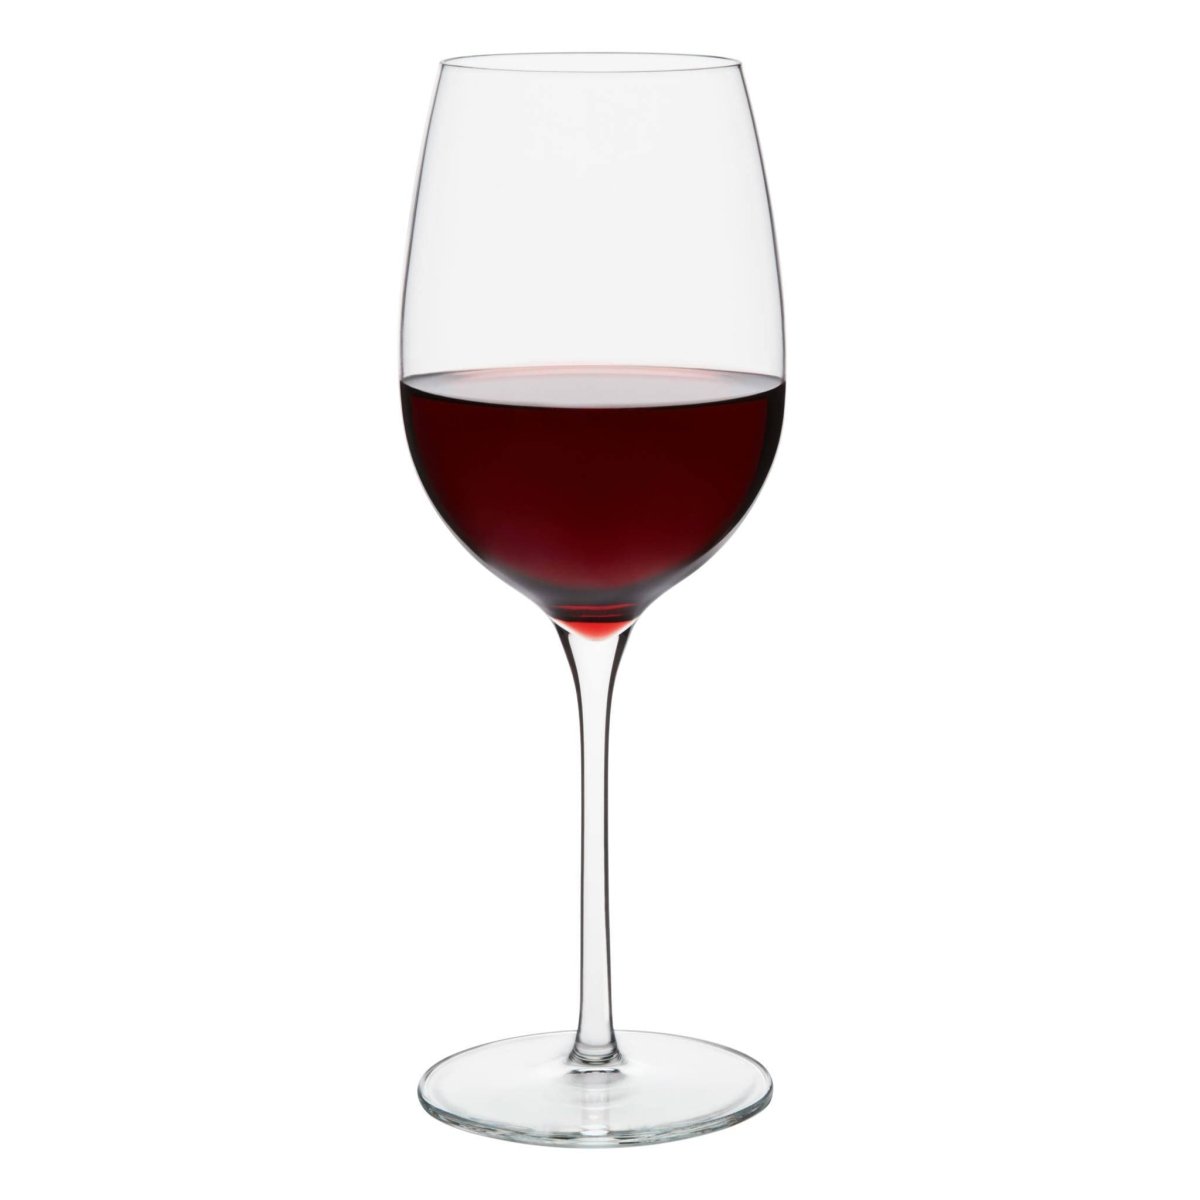 Libbey Signature Greenwich Red Wine Glasses 16-Ounce Set of 4